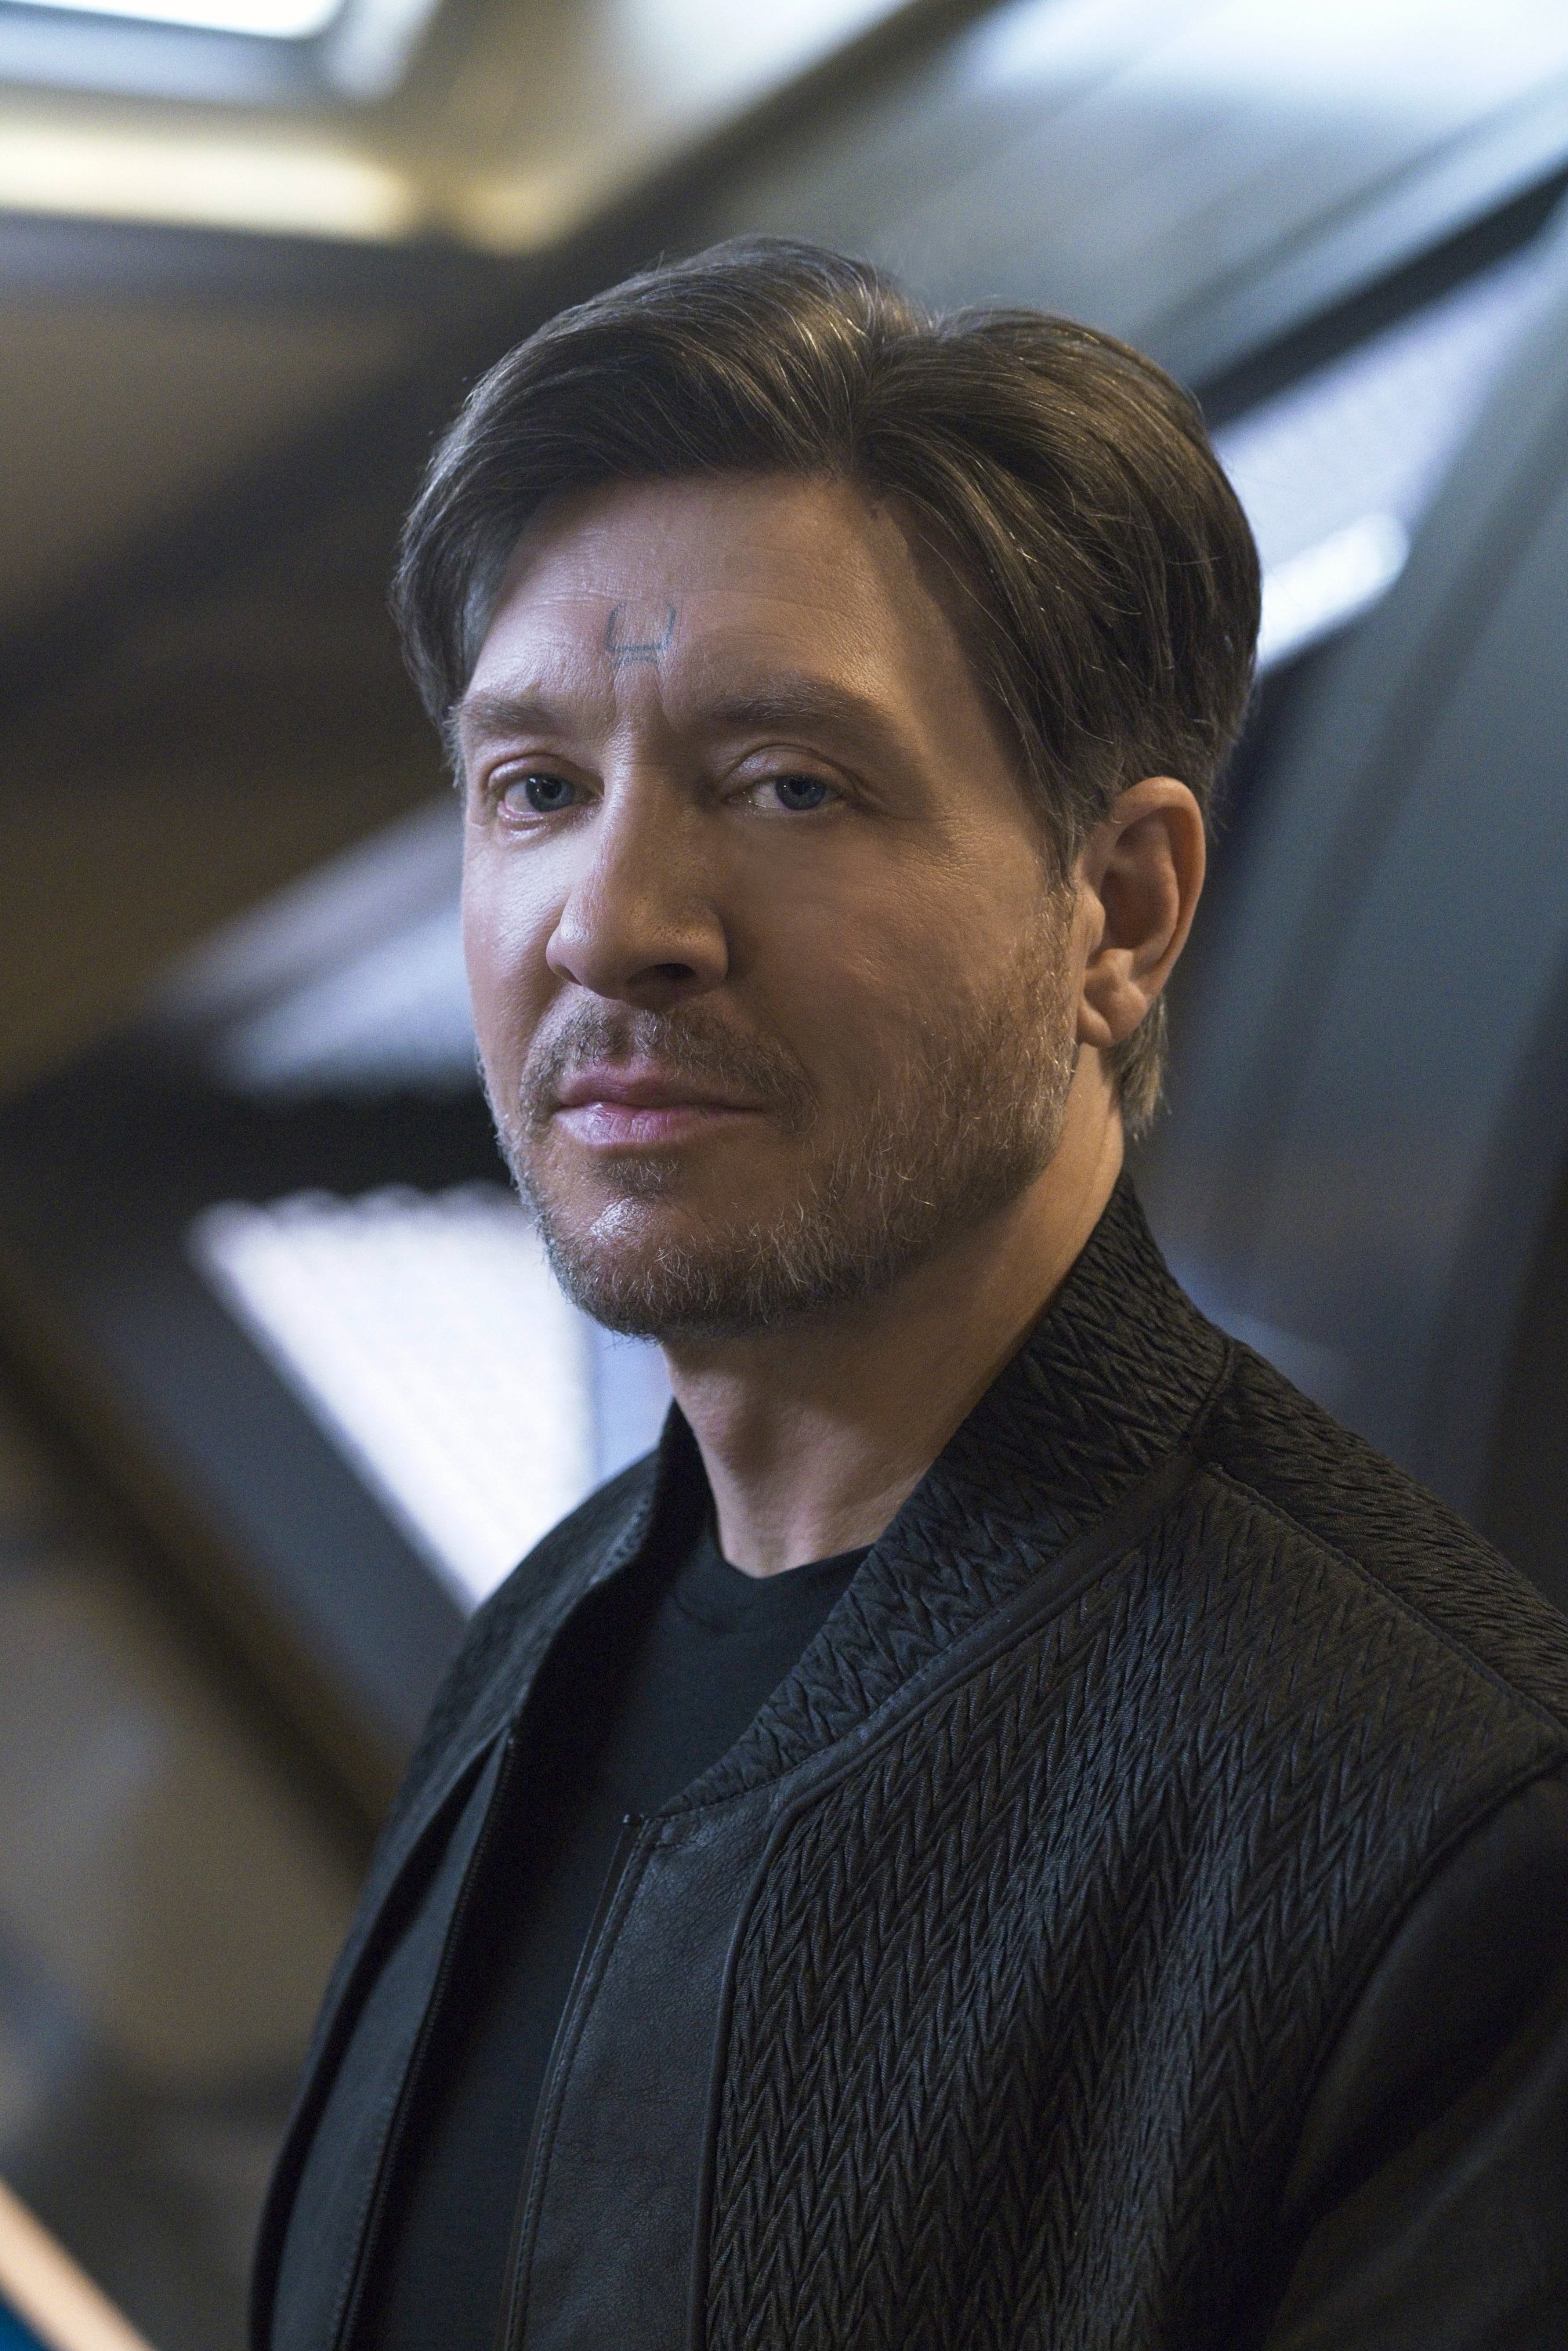   Pictured: Shawn Doyle as Ruon Tarka of the Paramount+ original series STAR TREK: DISCOVERY. Photo Cr: Michael Gibson/Paramount+ (C) 2021 CBS Interactive. All Rights Reserved.  